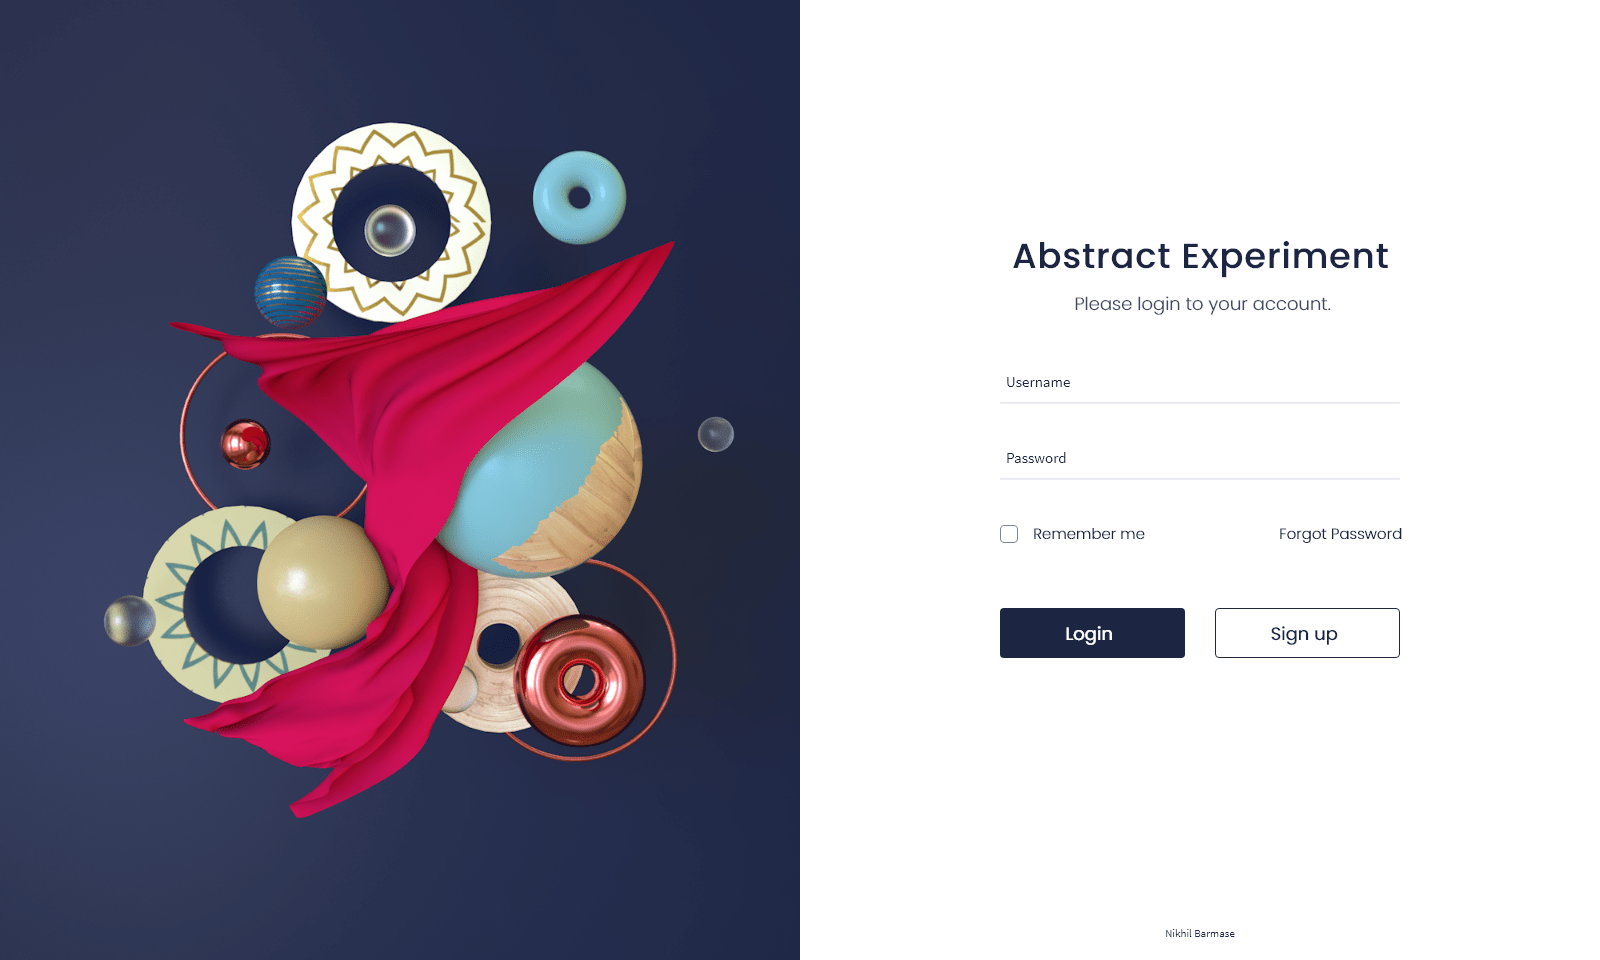 Abstract Experiment on Behance4db84984981837.5d6e53742f44d.png